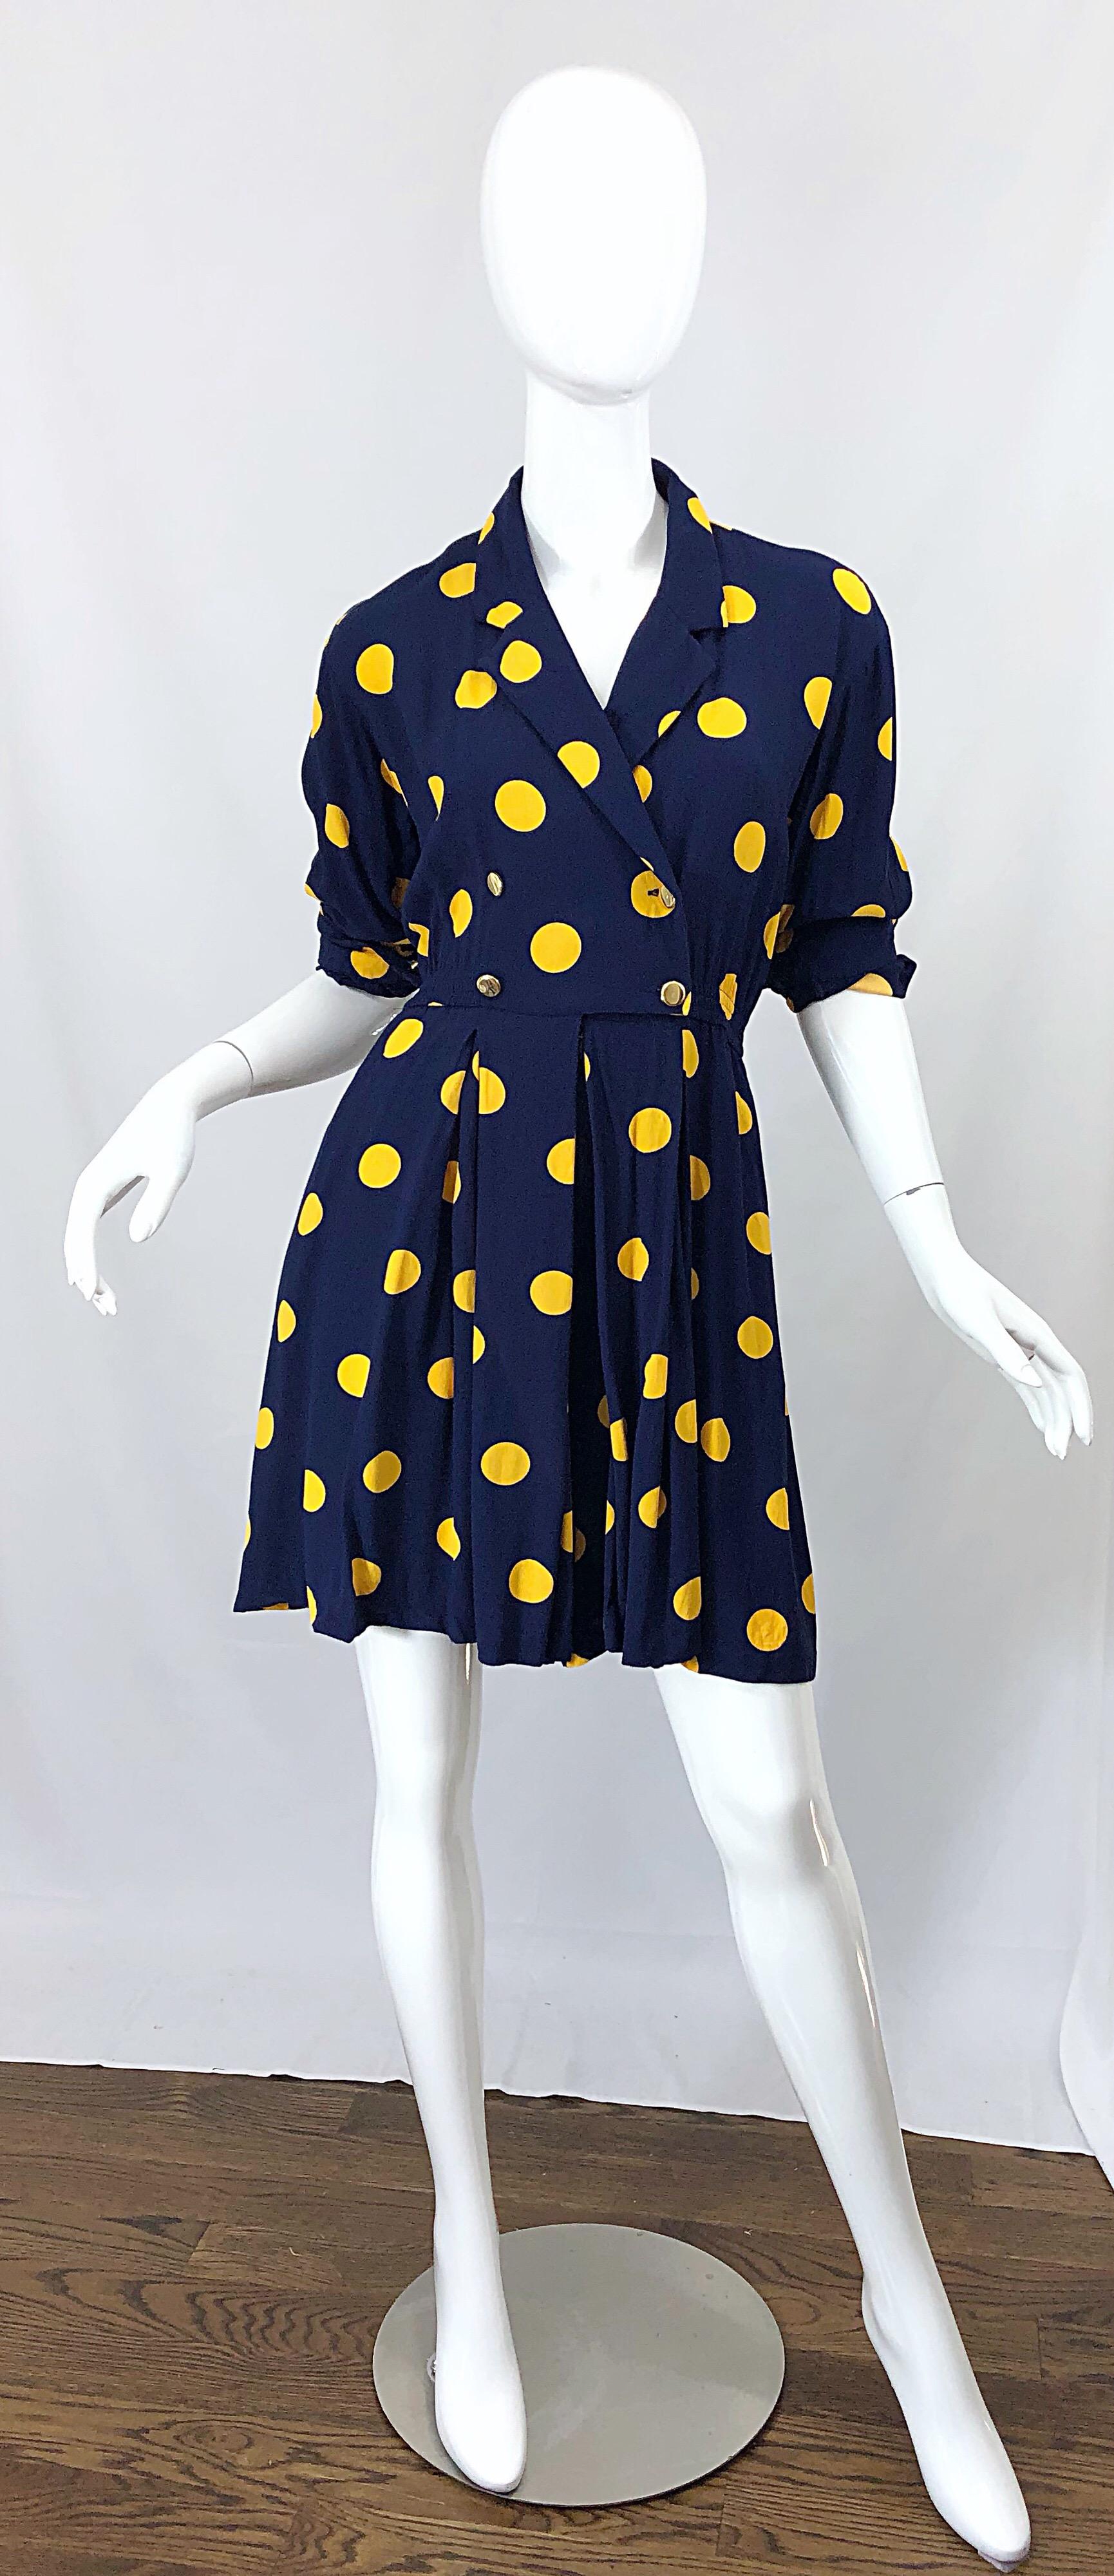 Women's Size 8 Romper Late 1980s Navy Blue and Yellow Polka Dot 80s Vintage Romper